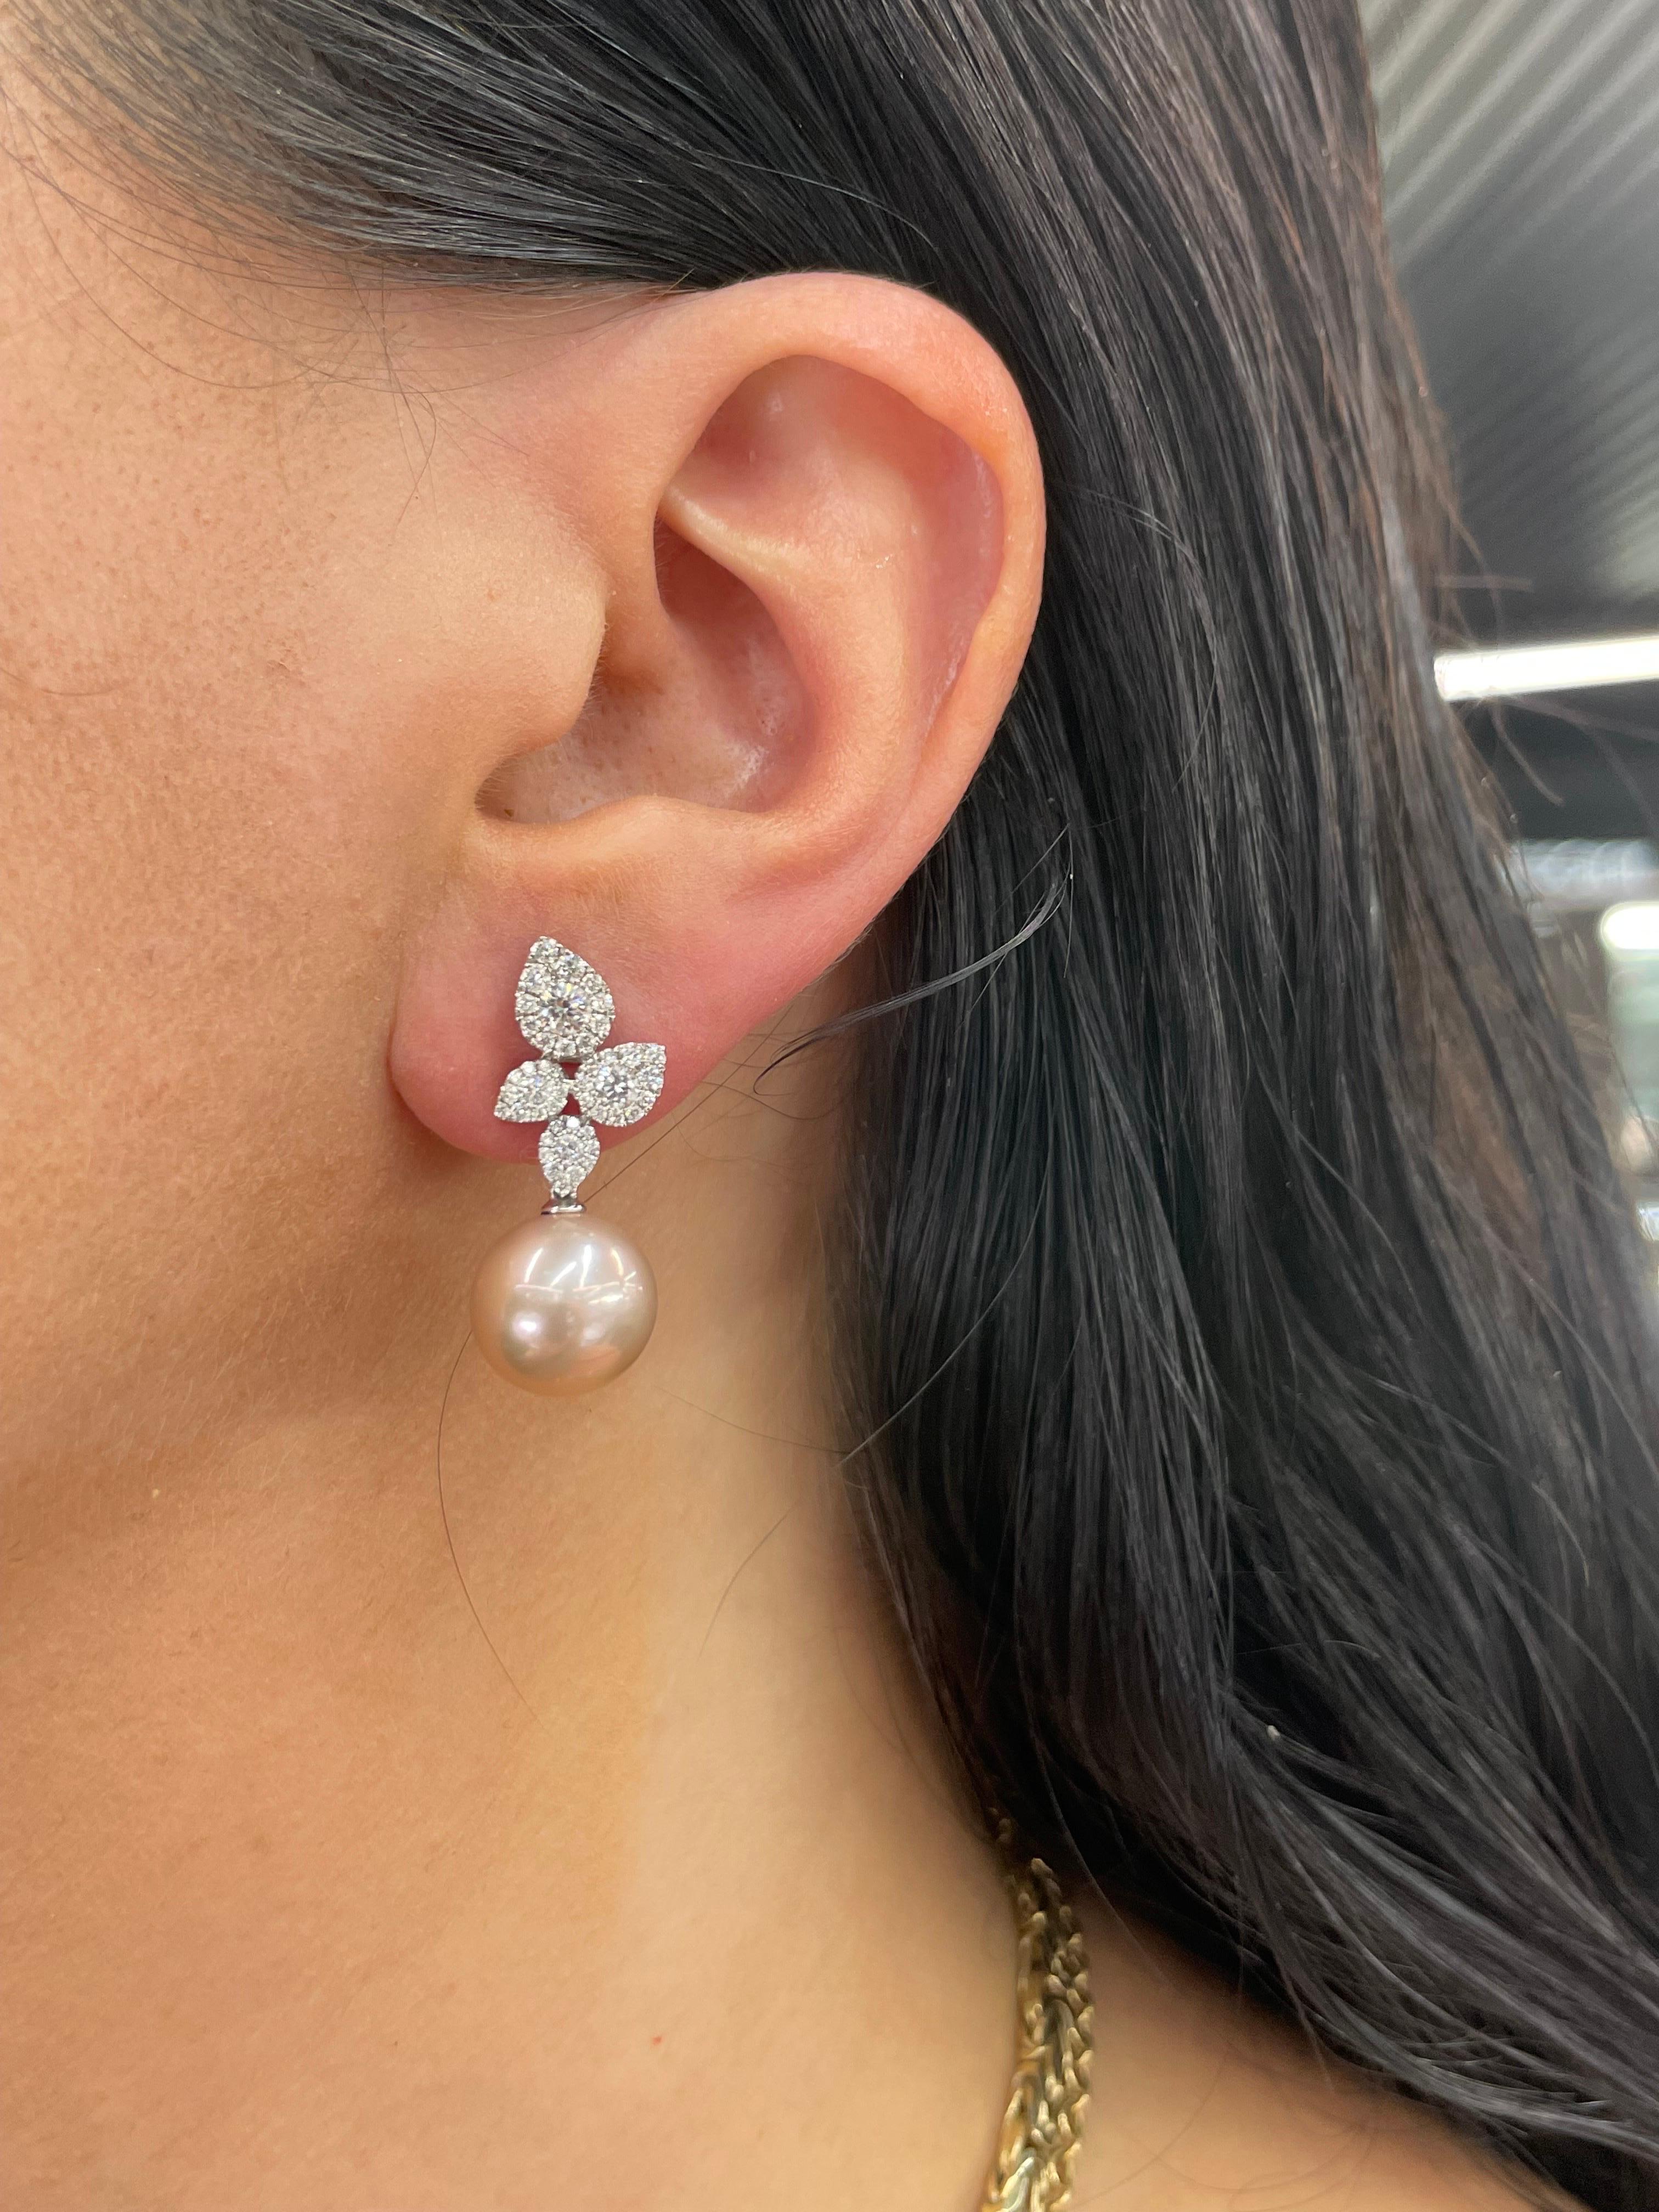 18 Karat White Gold floral drop earrings featuring 92 round brilliants weighing 1.05 Carats and two Pink Freshwater Pearls measuring 11-12 MM.
Color G-H
Clarity SI

Can be ordered in Gold South Sea, White South Sea or Tahitian Pearls 
DM for pricing 